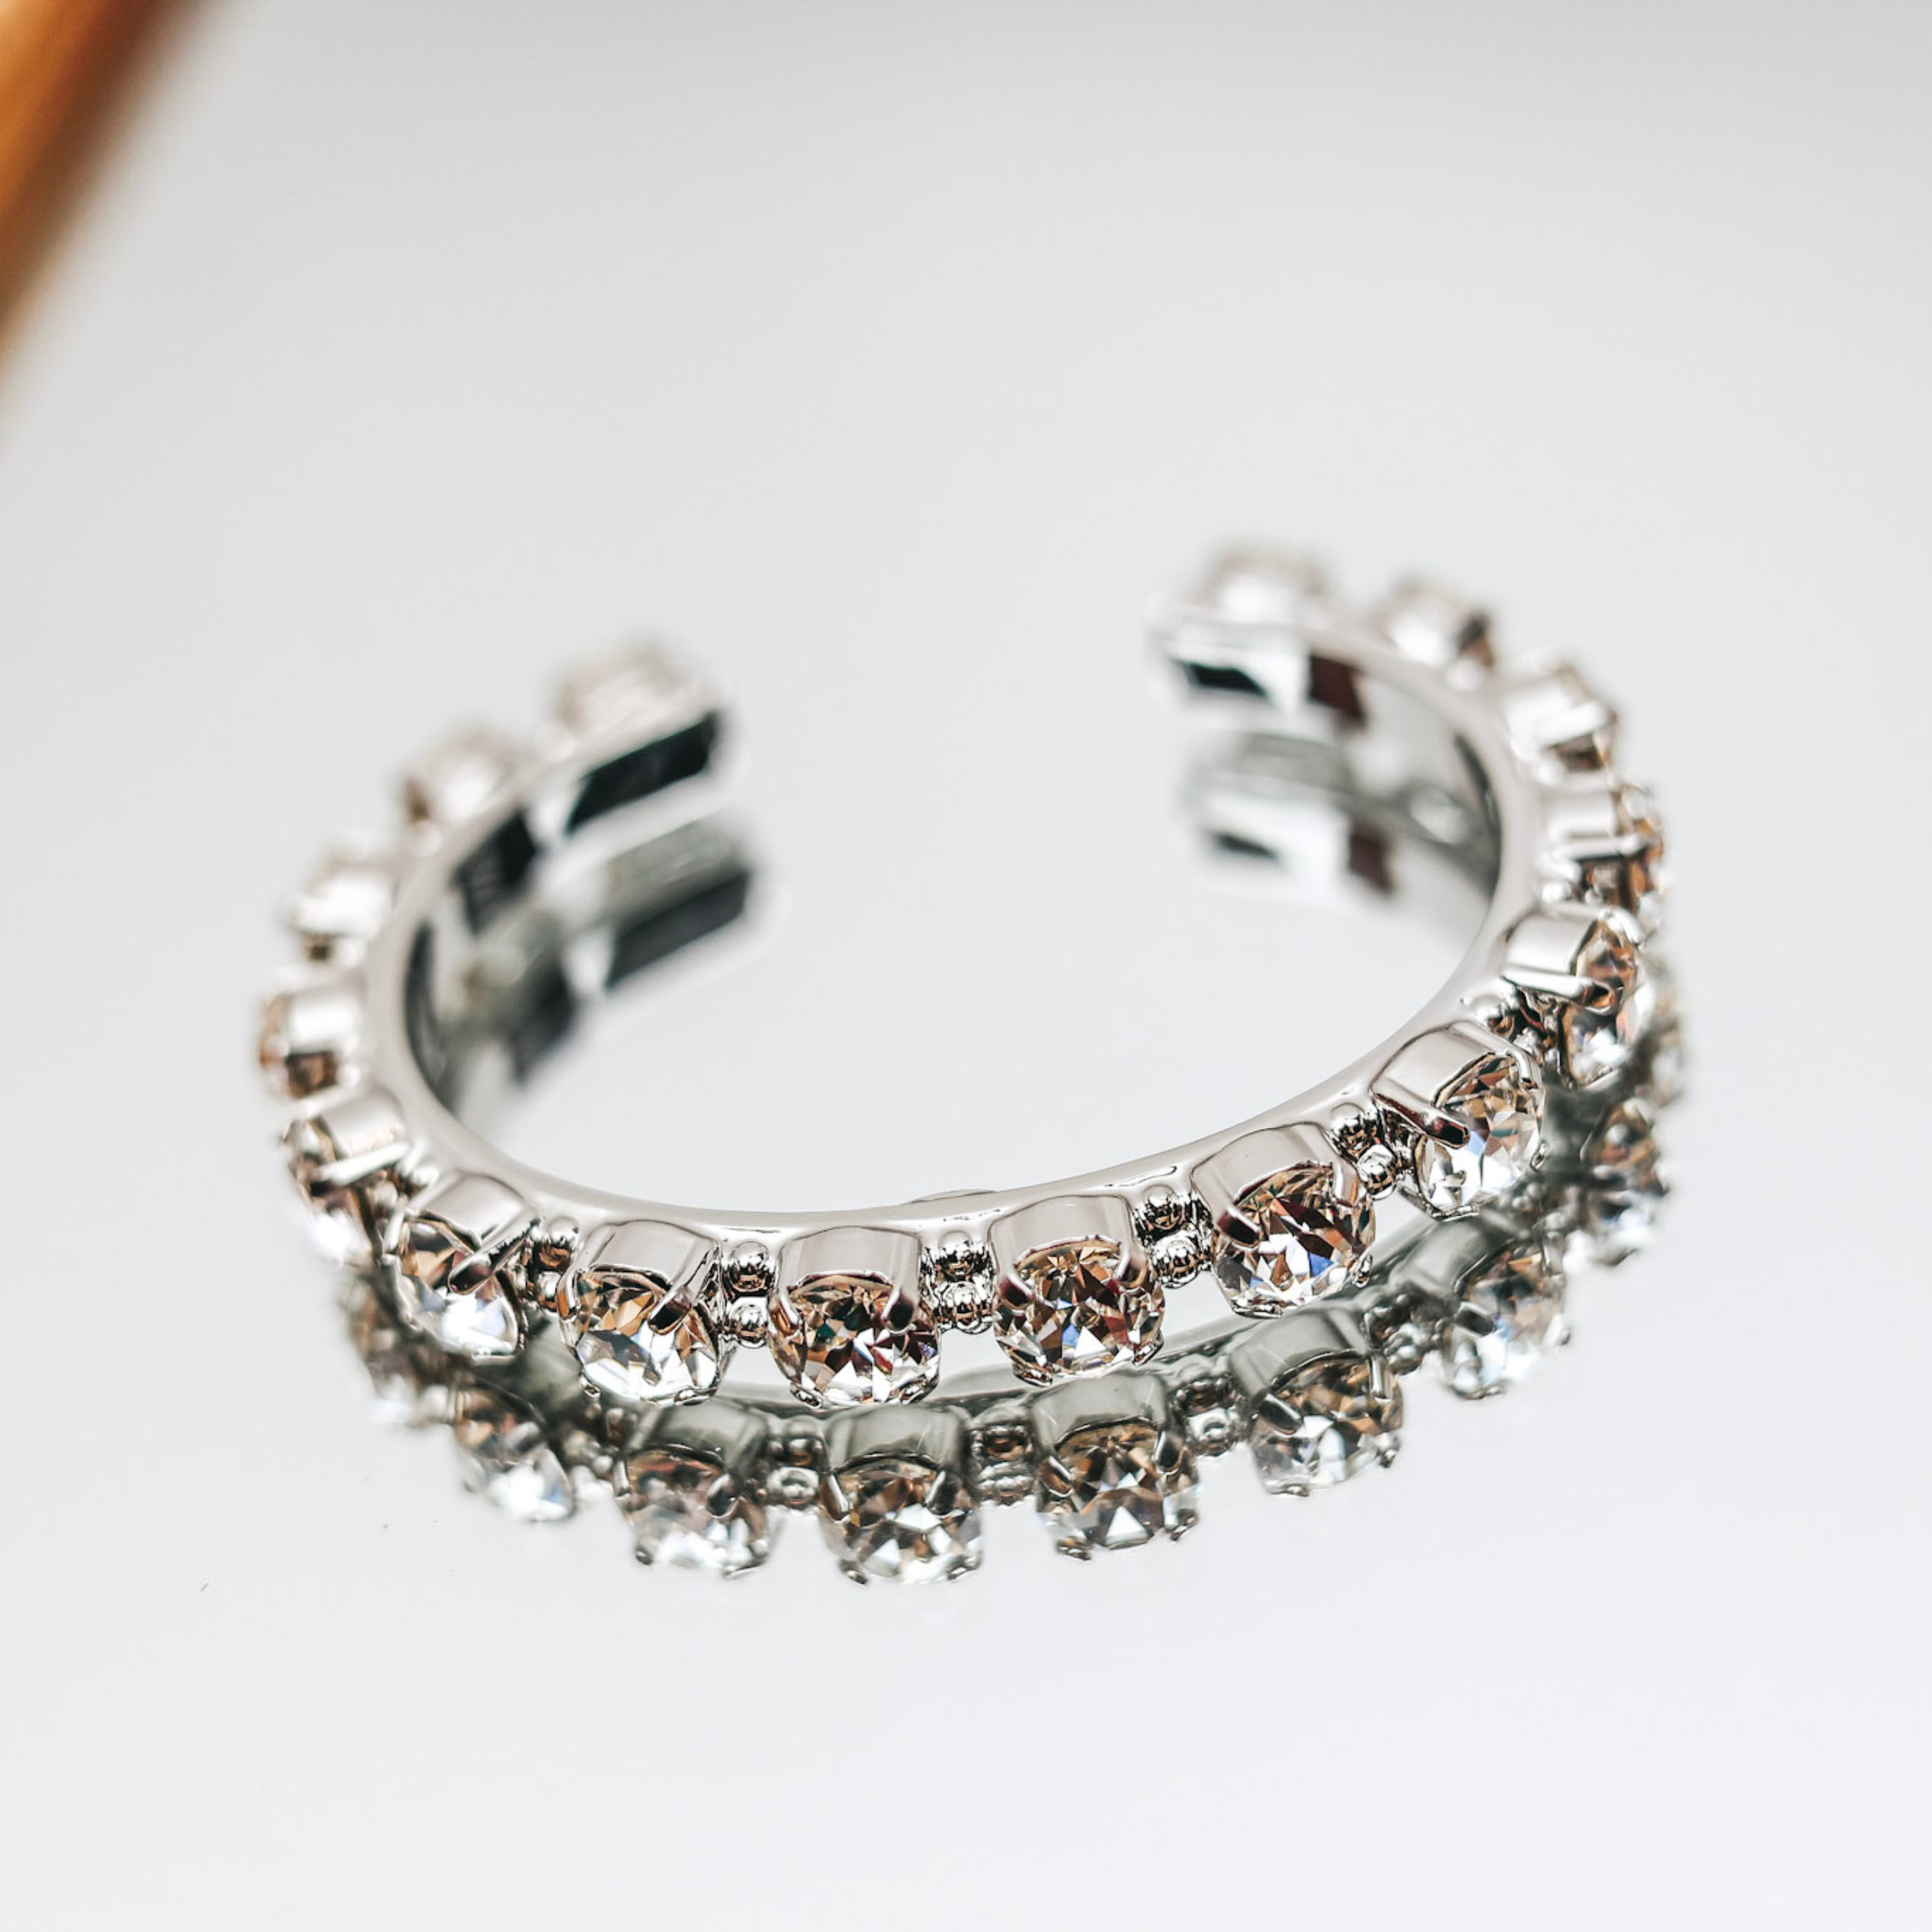 A silver tone cuff bracelet with clear crystals along the cuff.